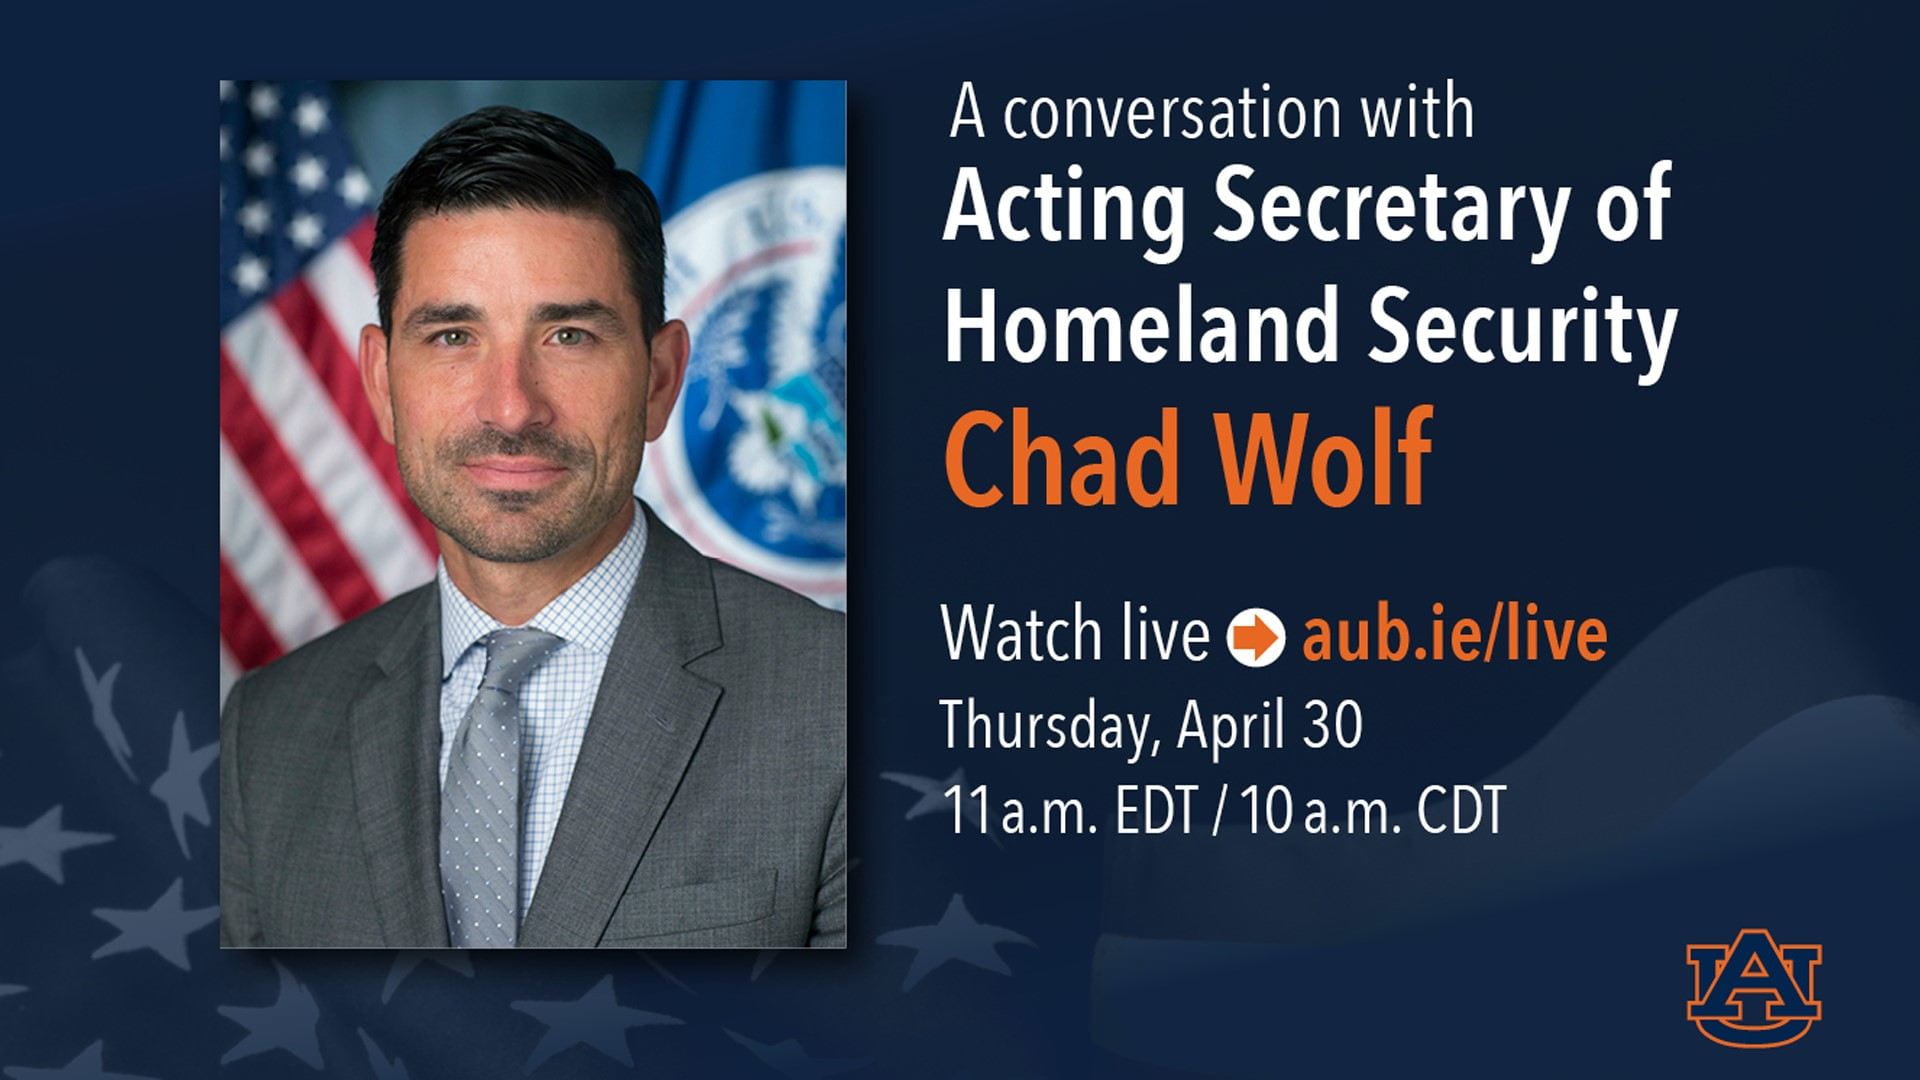 A Conversation with Acting Secretary of Homeland Security Chad Wolf